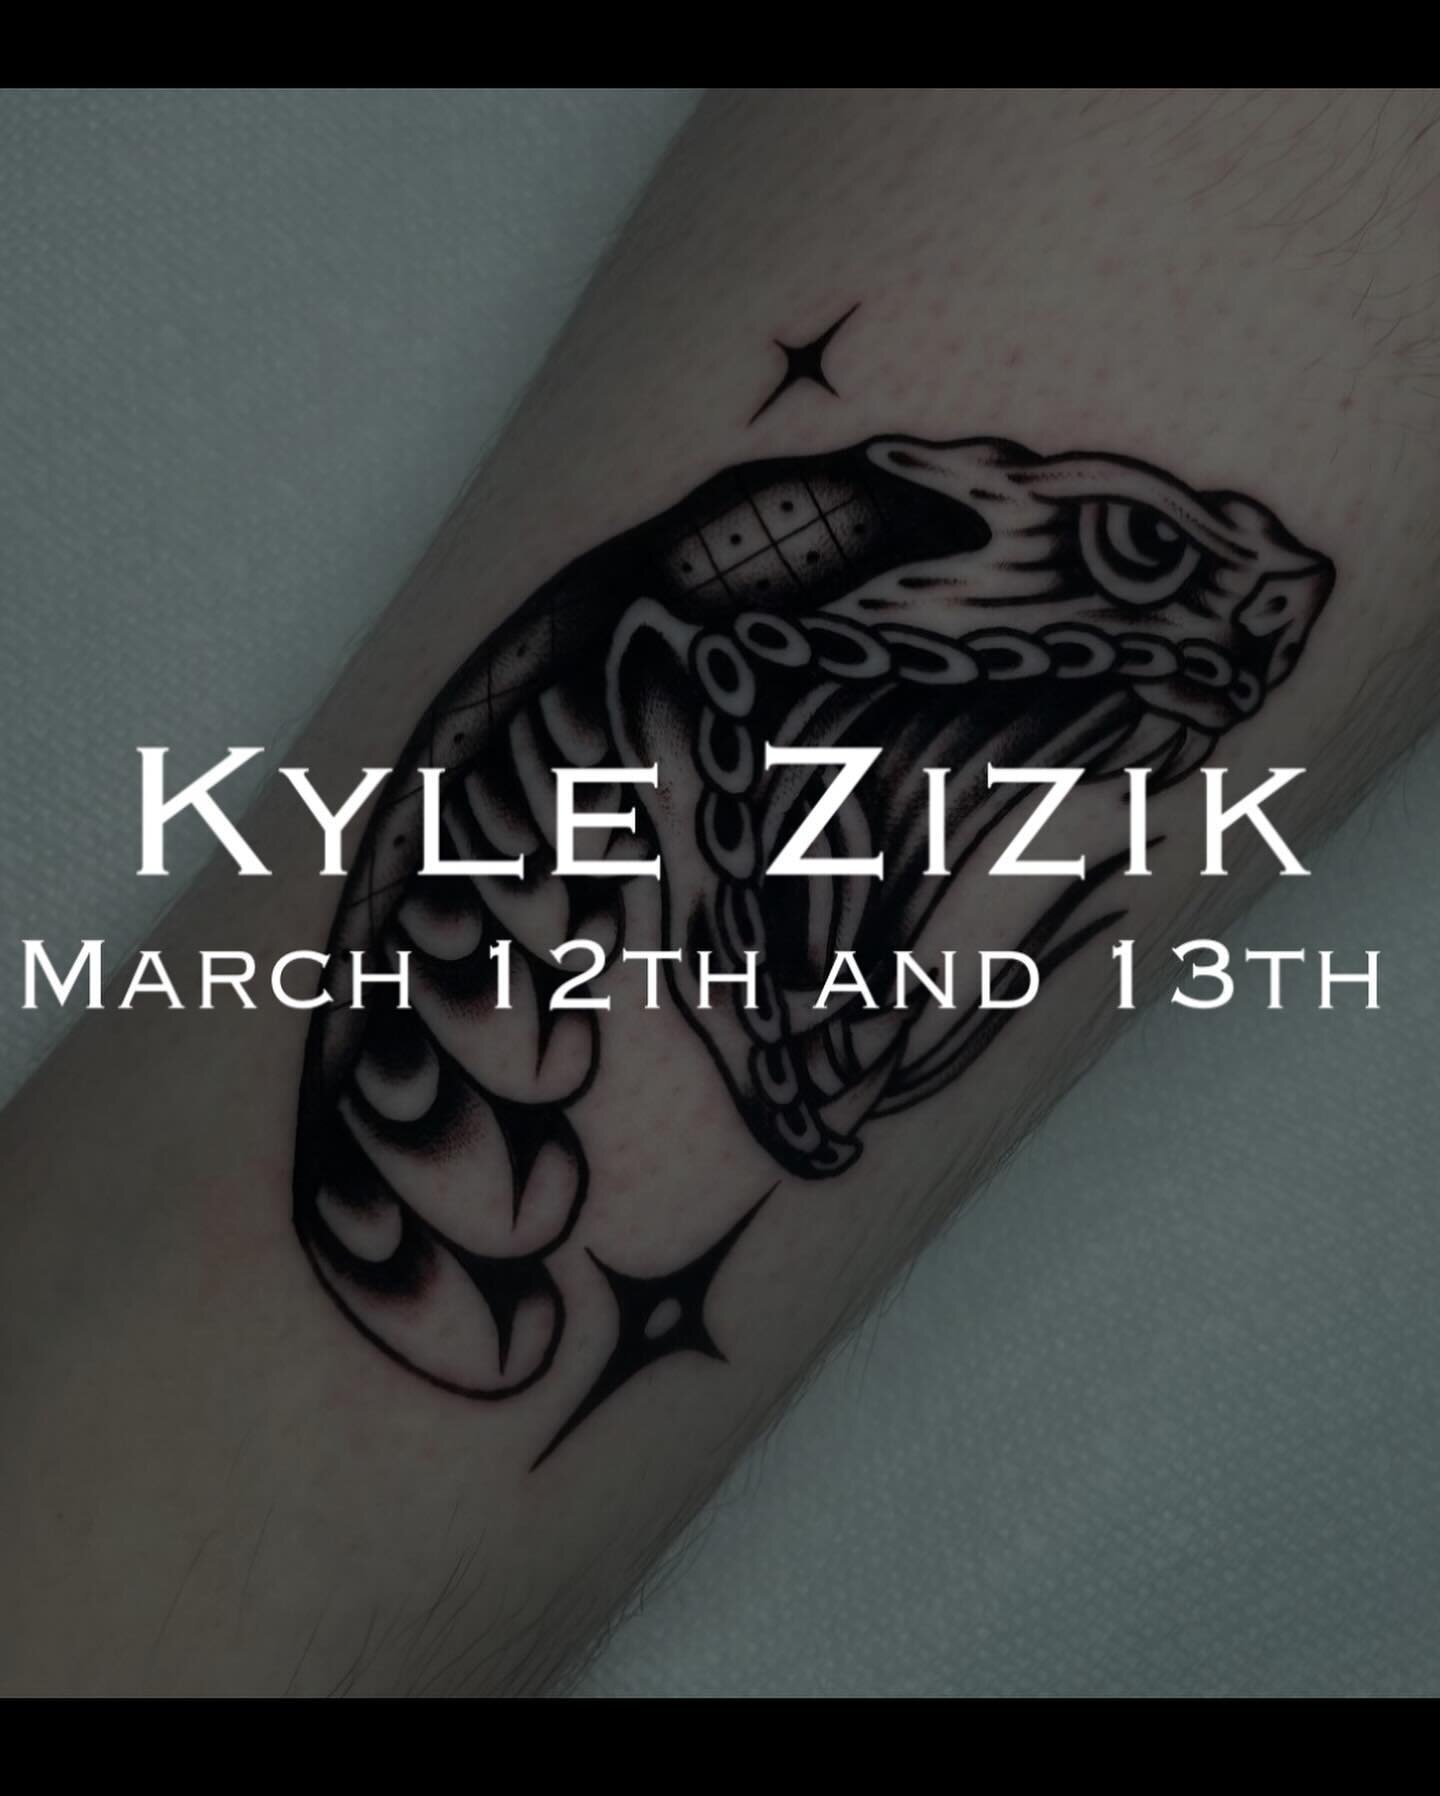 @ziziktattoos is coming to guest with us March 12th and 13th! Swipe to see his available flash, or reach out to him directly for something custom!